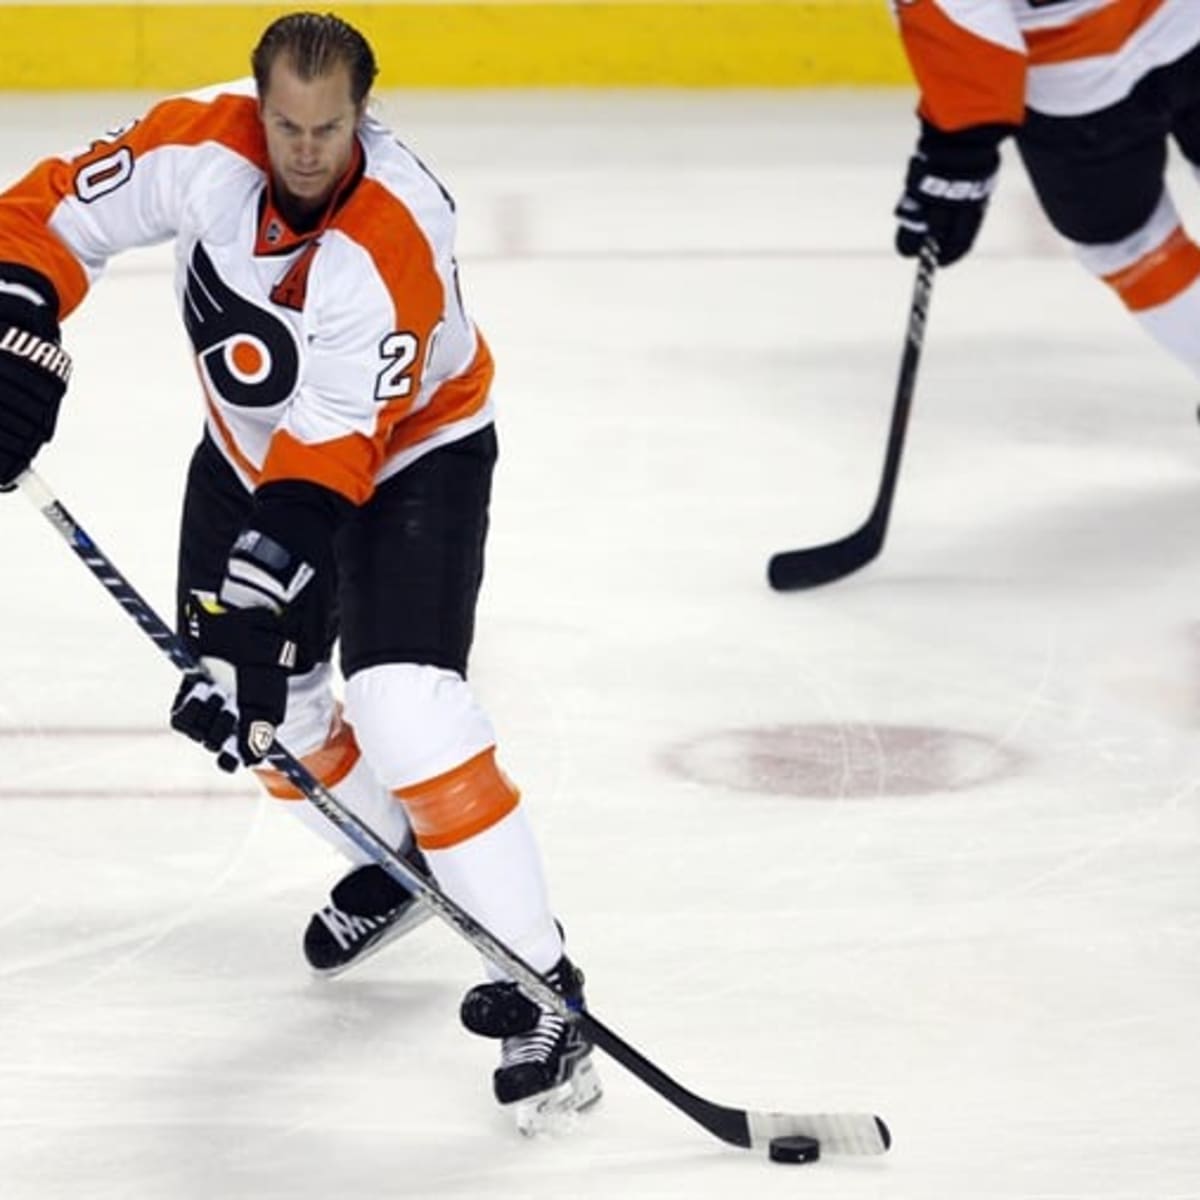 NHL: Flyers captain Pronger out for rest of season